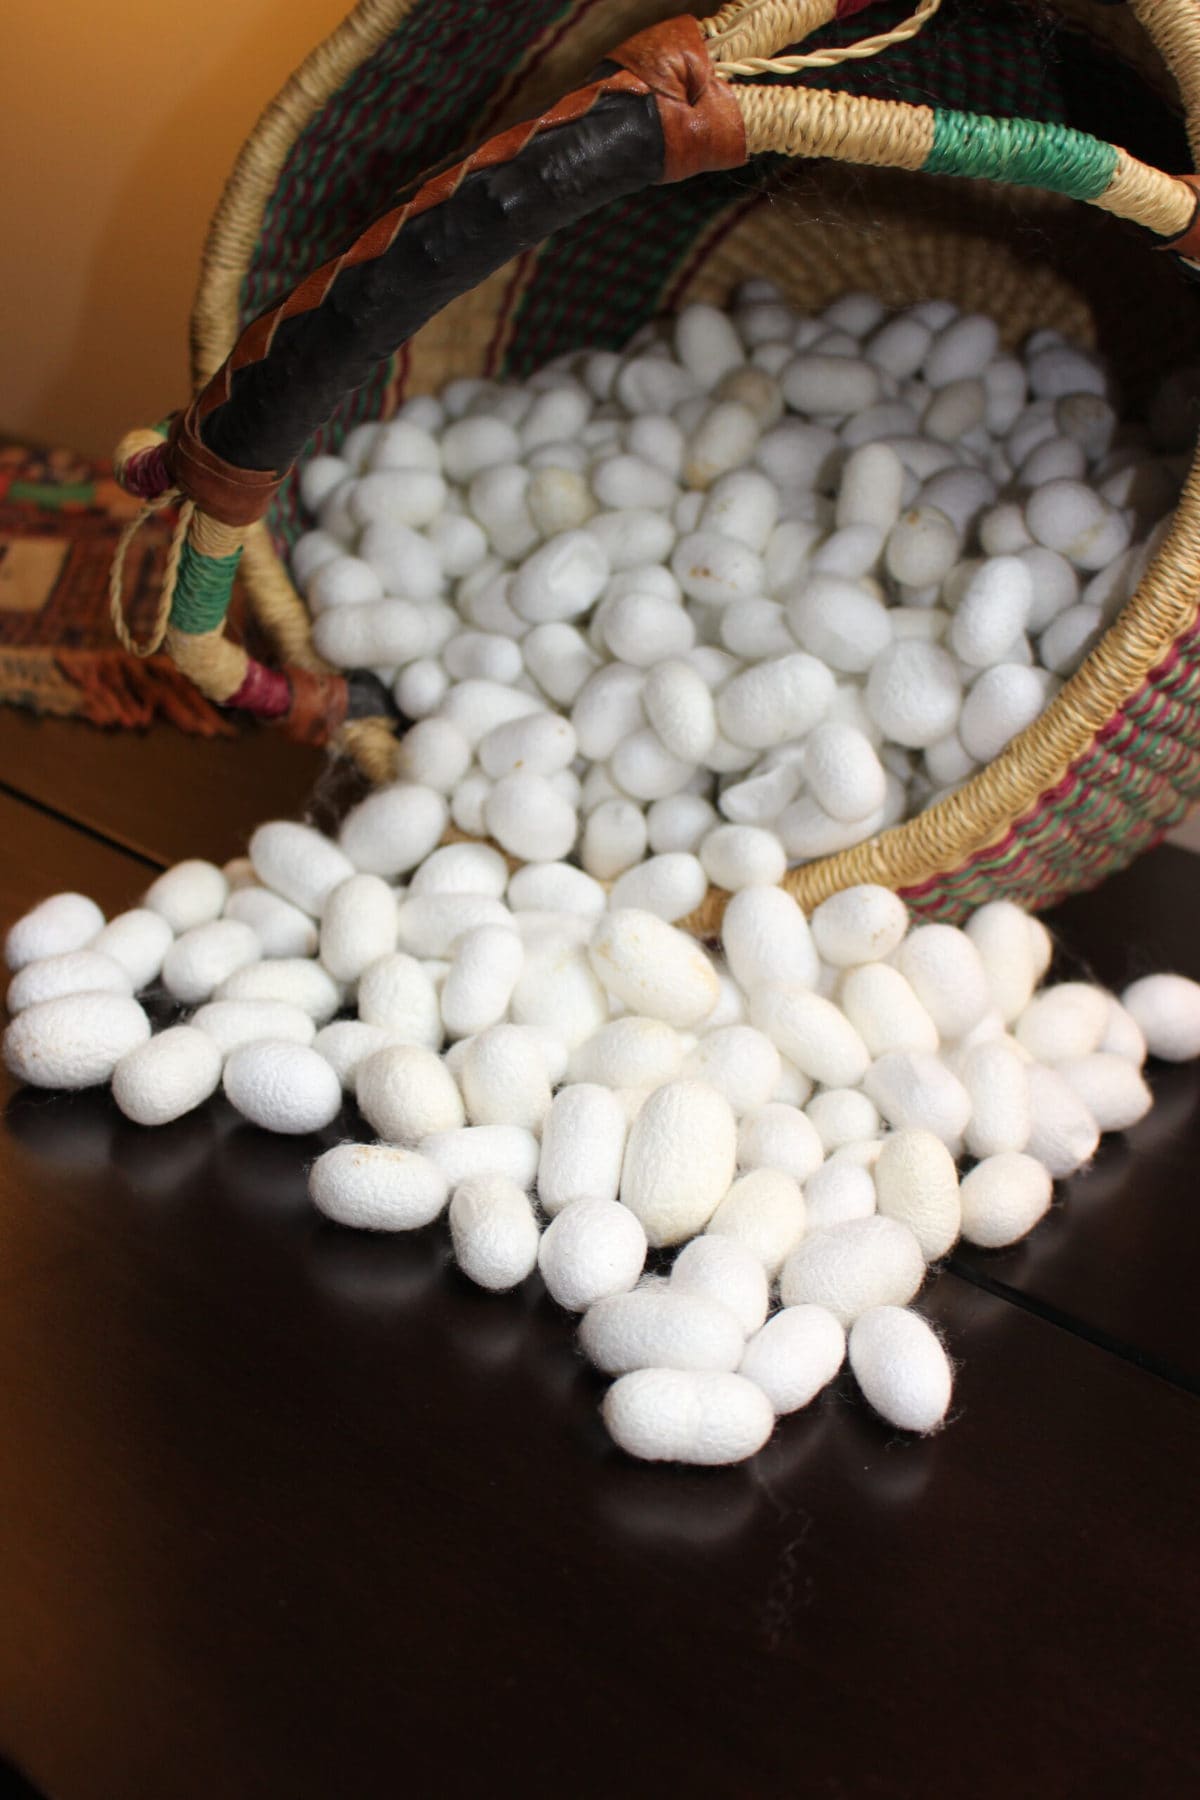 image descriptions: many silk cocoons, tumbling out of a basket